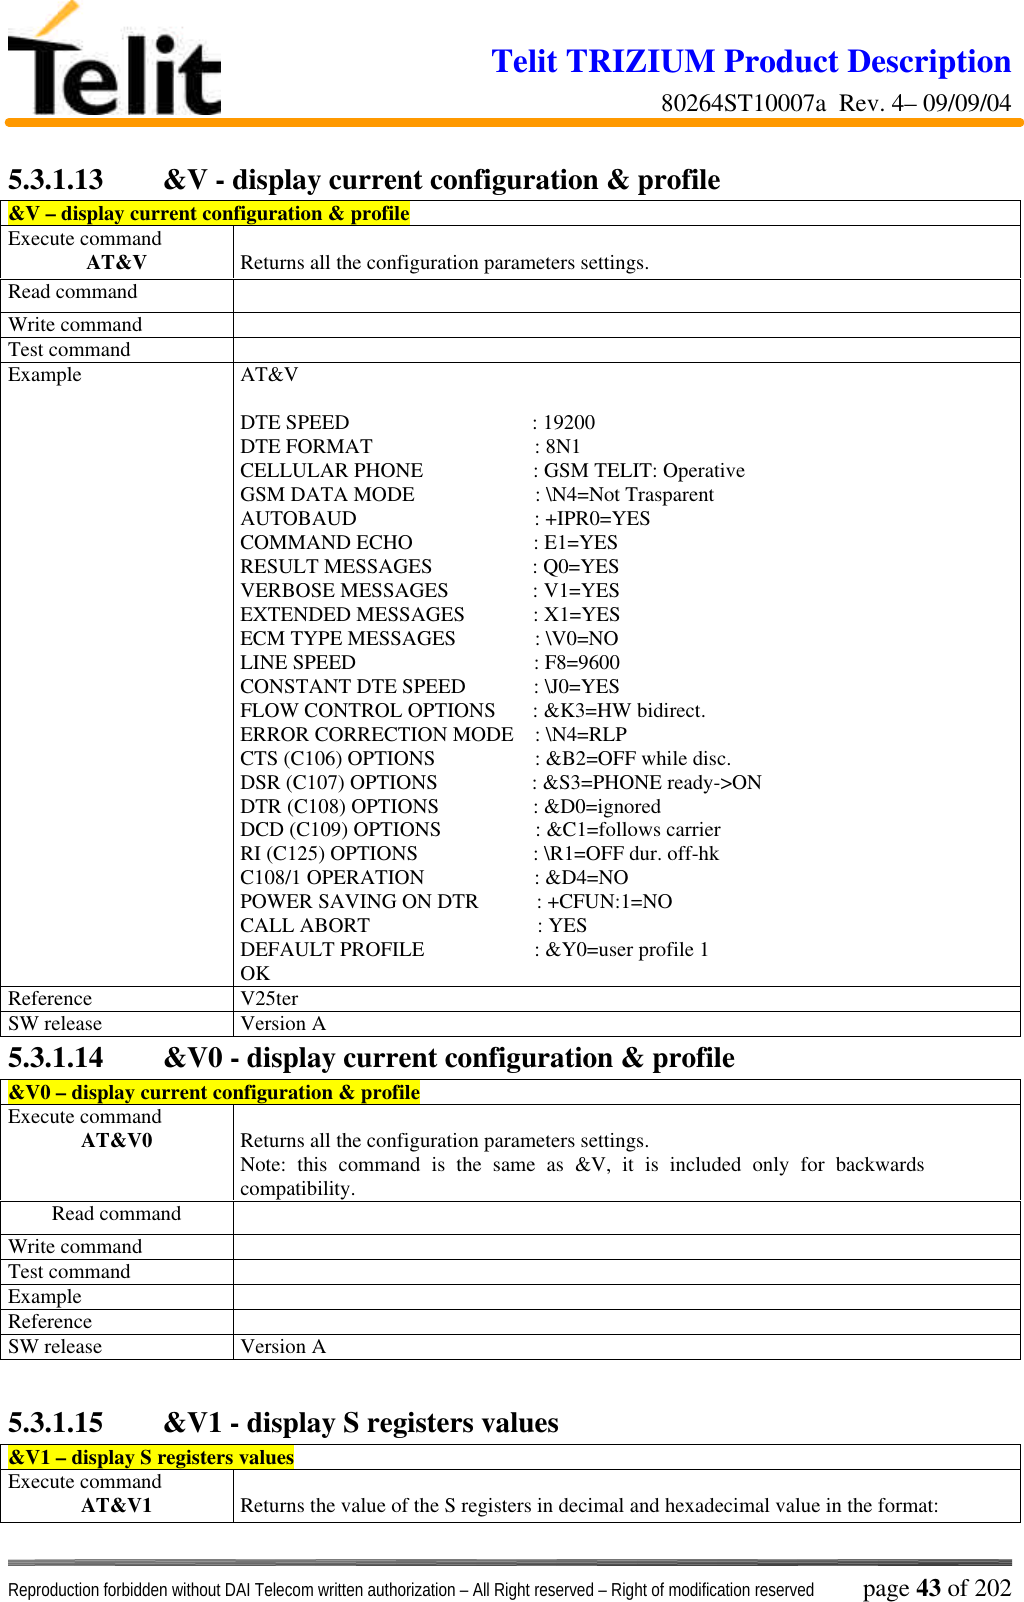 Telit TRIZIUM Product Description80264ST10007a  Rev. 4– 09/09/04Reproduction forbidden without DAI Telecom written authorization – All Right reserved – Right of modification reserved page 43 of 2025.3.1.13  &amp;V - display current configuration &amp; profile&amp;V – display current configuration &amp; profileExecute commandAT&amp;V Returns all the configuration parameters settings.Read commandWrite commandTest commandExample AT&amp;VDTE SPEED                                   : 19200DTE FORMAT                               : 8N1CELLULAR PHONE                     : GSM TELIT: OperativeGSM DATA MODE                       : \N4=Not TrasparentAUTOBAUD                                  : +IPR0=YESCOMMAND ECHO                       : E1=YESRESULT MESSAGES                   : Q0=YESVERBOSE MESSAGES                : V1=YESEXTENDED MESSAGES             : X1=YESECM TYPE MESSAGES               : \V0=NOLINE SPEED                                  : F8=9600CONSTANT DTE SPEED             : \J0=YESFLOW CONTROL OPTIONS       : &amp;K3=HW bidirect.ERROR CORRECTION MODE    : \N4=RLPCTS (C106) OPTIONS                   : &amp;B2=OFF while disc.DSR (C107) OPTIONS                  : &amp;S3=PHONE ready-&gt;ONDTR (C108) OPTIONS                  : &amp;D0=ignoredDCD (C109) OPTIONS                  : &amp;C1=follows carrierRI (C125) OPTIONS                      : \R1=OFF dur. off-hkC108/1 OPERATION                     : &amp;D4=NOPOWER SAVING ON DTR           : +CFUN:1=NOCALL ABORT                                : YESDEFAULT PROFILE                     : &amp;Y0=user profile 1OKReference V25terSW release Version A5.3.1.14  &amp;V0 - display current configuration &amp; profile&amp;V0 – display current configuration &amp; profileExecute commandAT&amp;V0 Returns all the configuration parameters settings.Note: this command is the same as &amp;V, it is included only for backwardscompatibility.Read commandWrite commandTest commandExampleReferenceSW release Version A5.3.1.15  &amp;V1 - display S registers values&amp;V1 – display S registers valuesExecute commandAT&amp;V1 Returns the value of the S registers in decimal and hexadecimal value in the format: